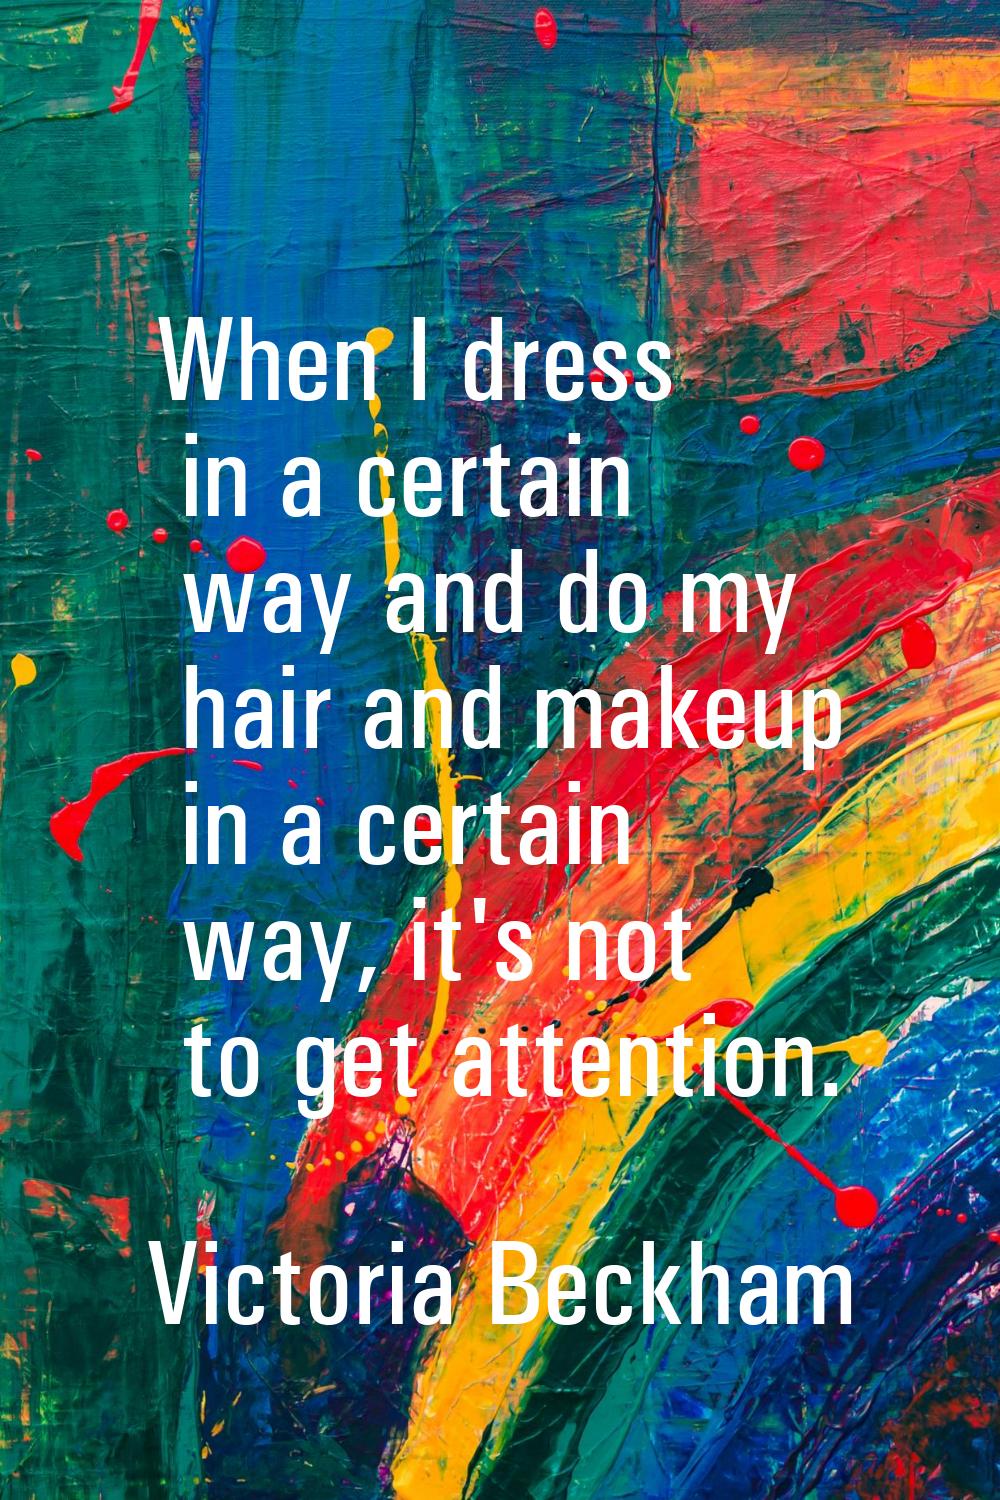 When I dress in a certain way and do my hair and makeup in a certain way, it's not to get attention